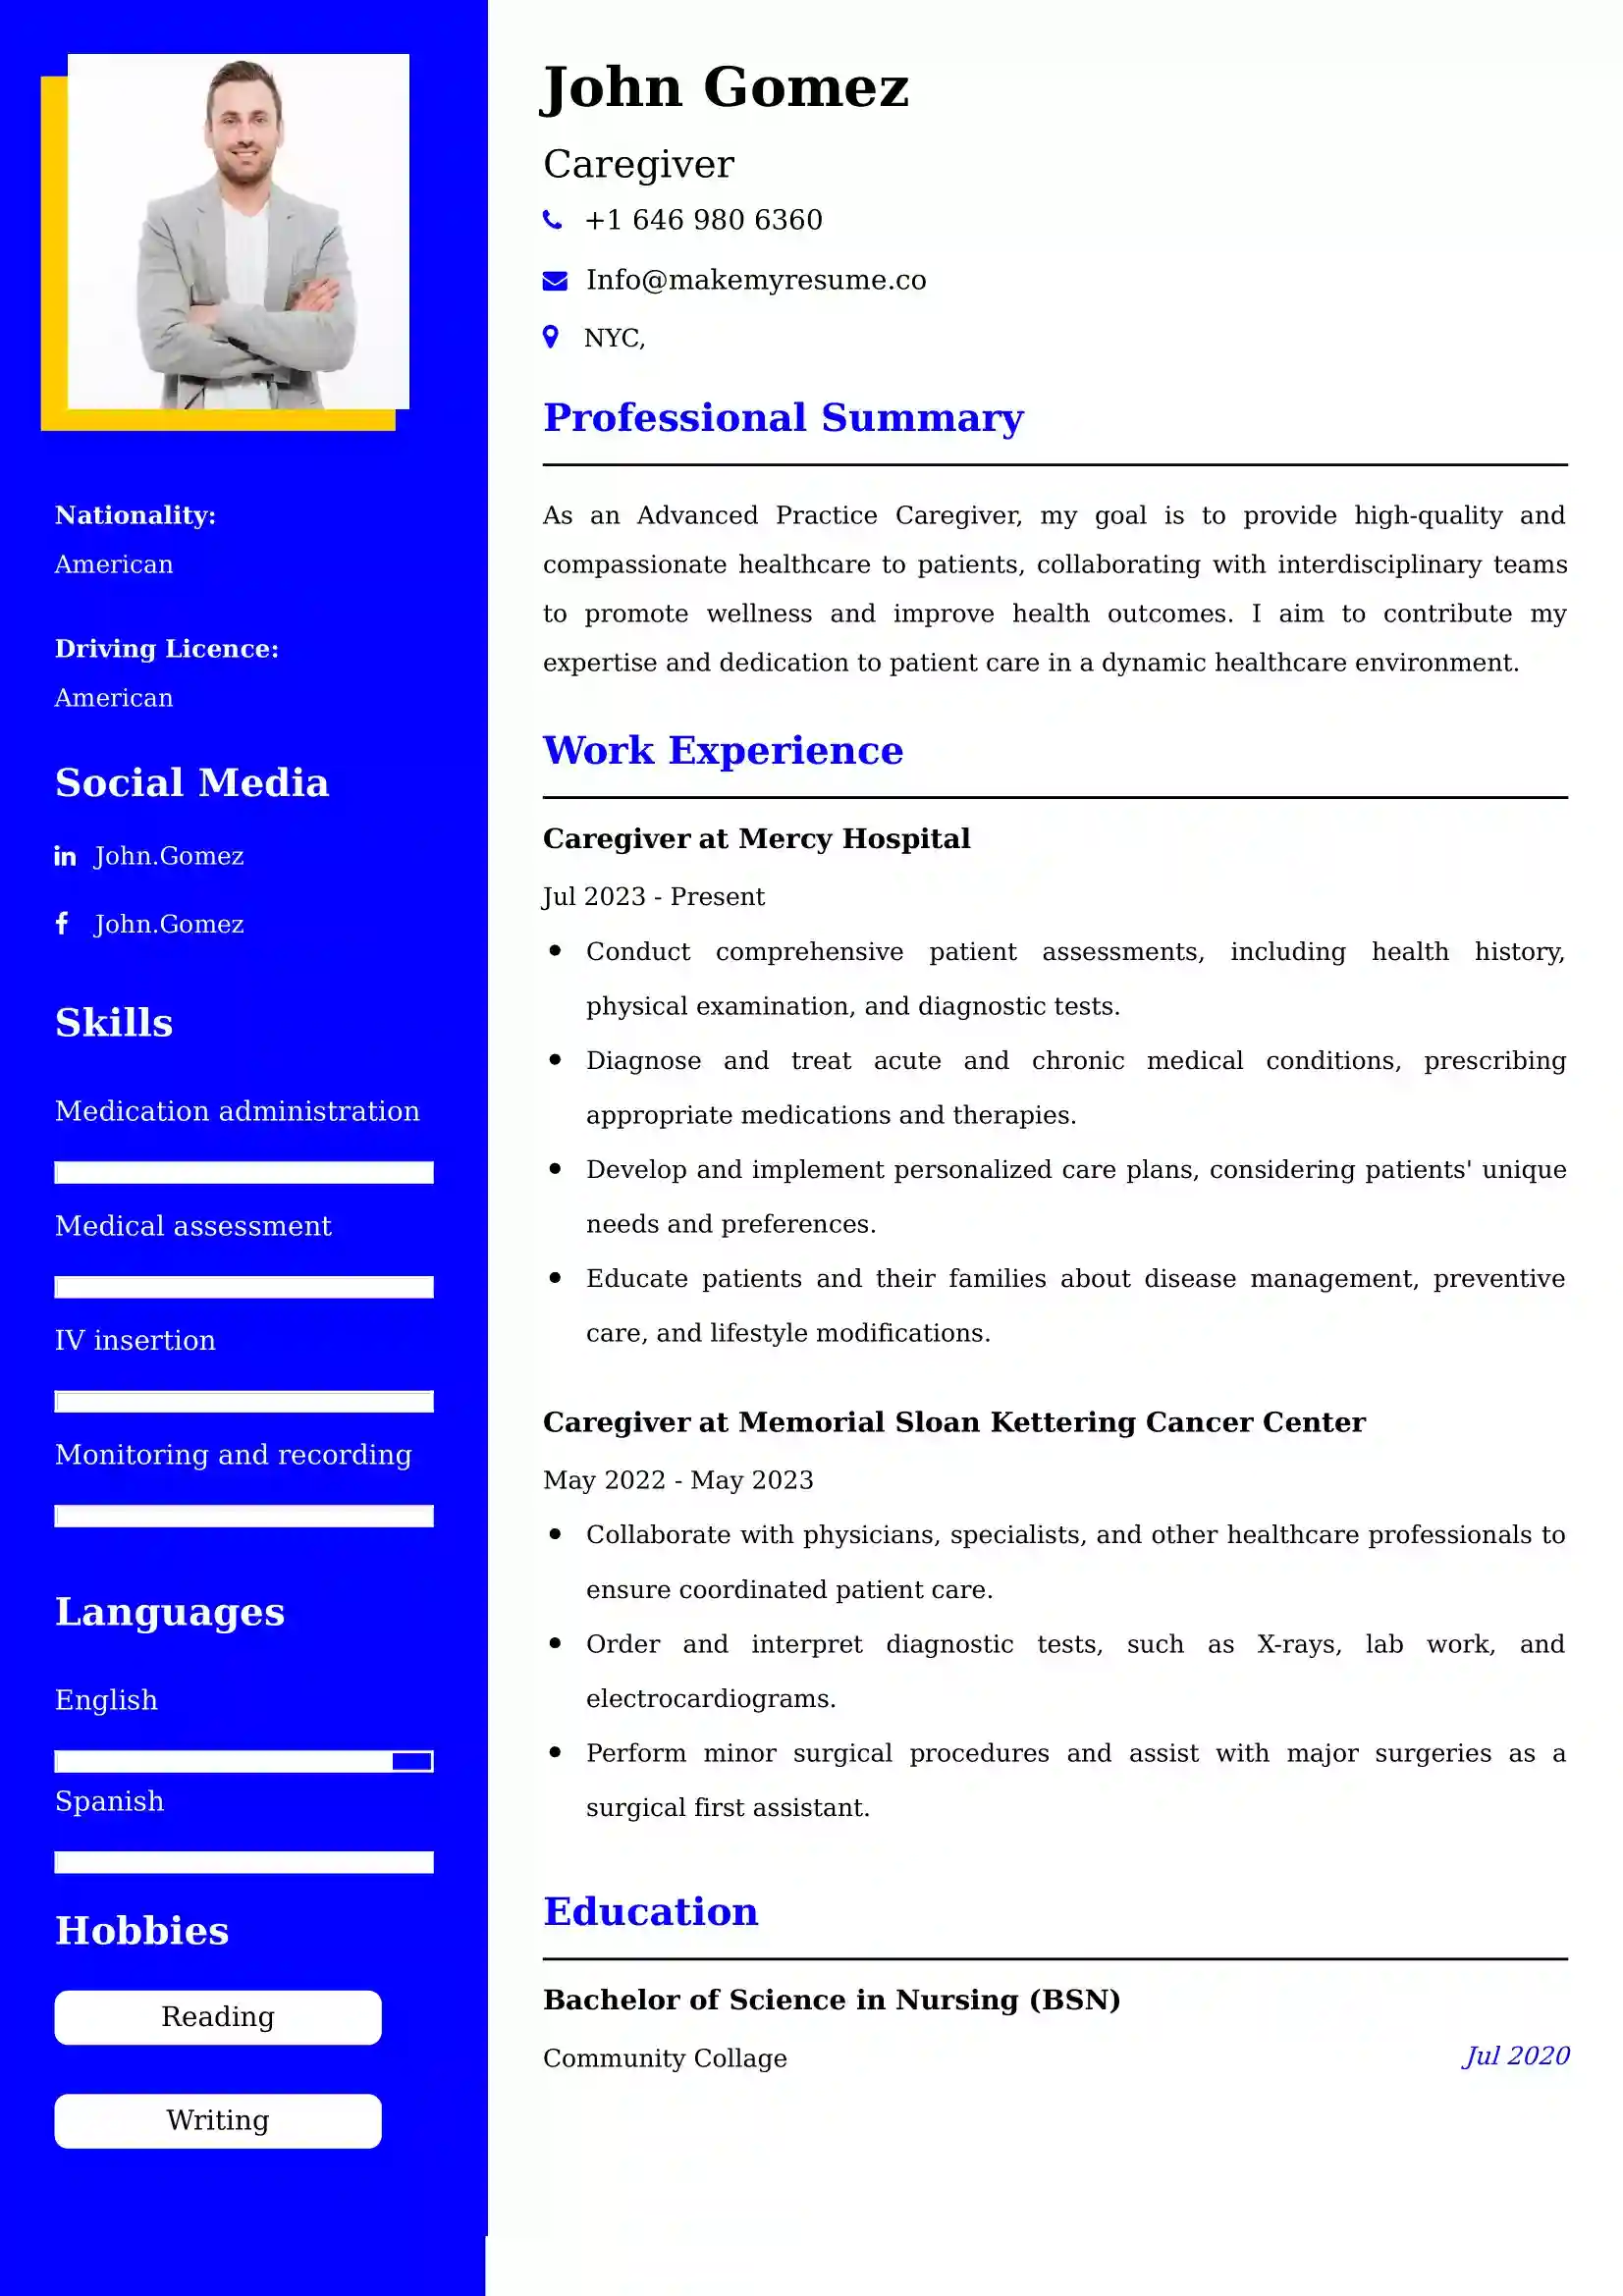 Caregiver Resume Examples - UK Format, Latest Template.